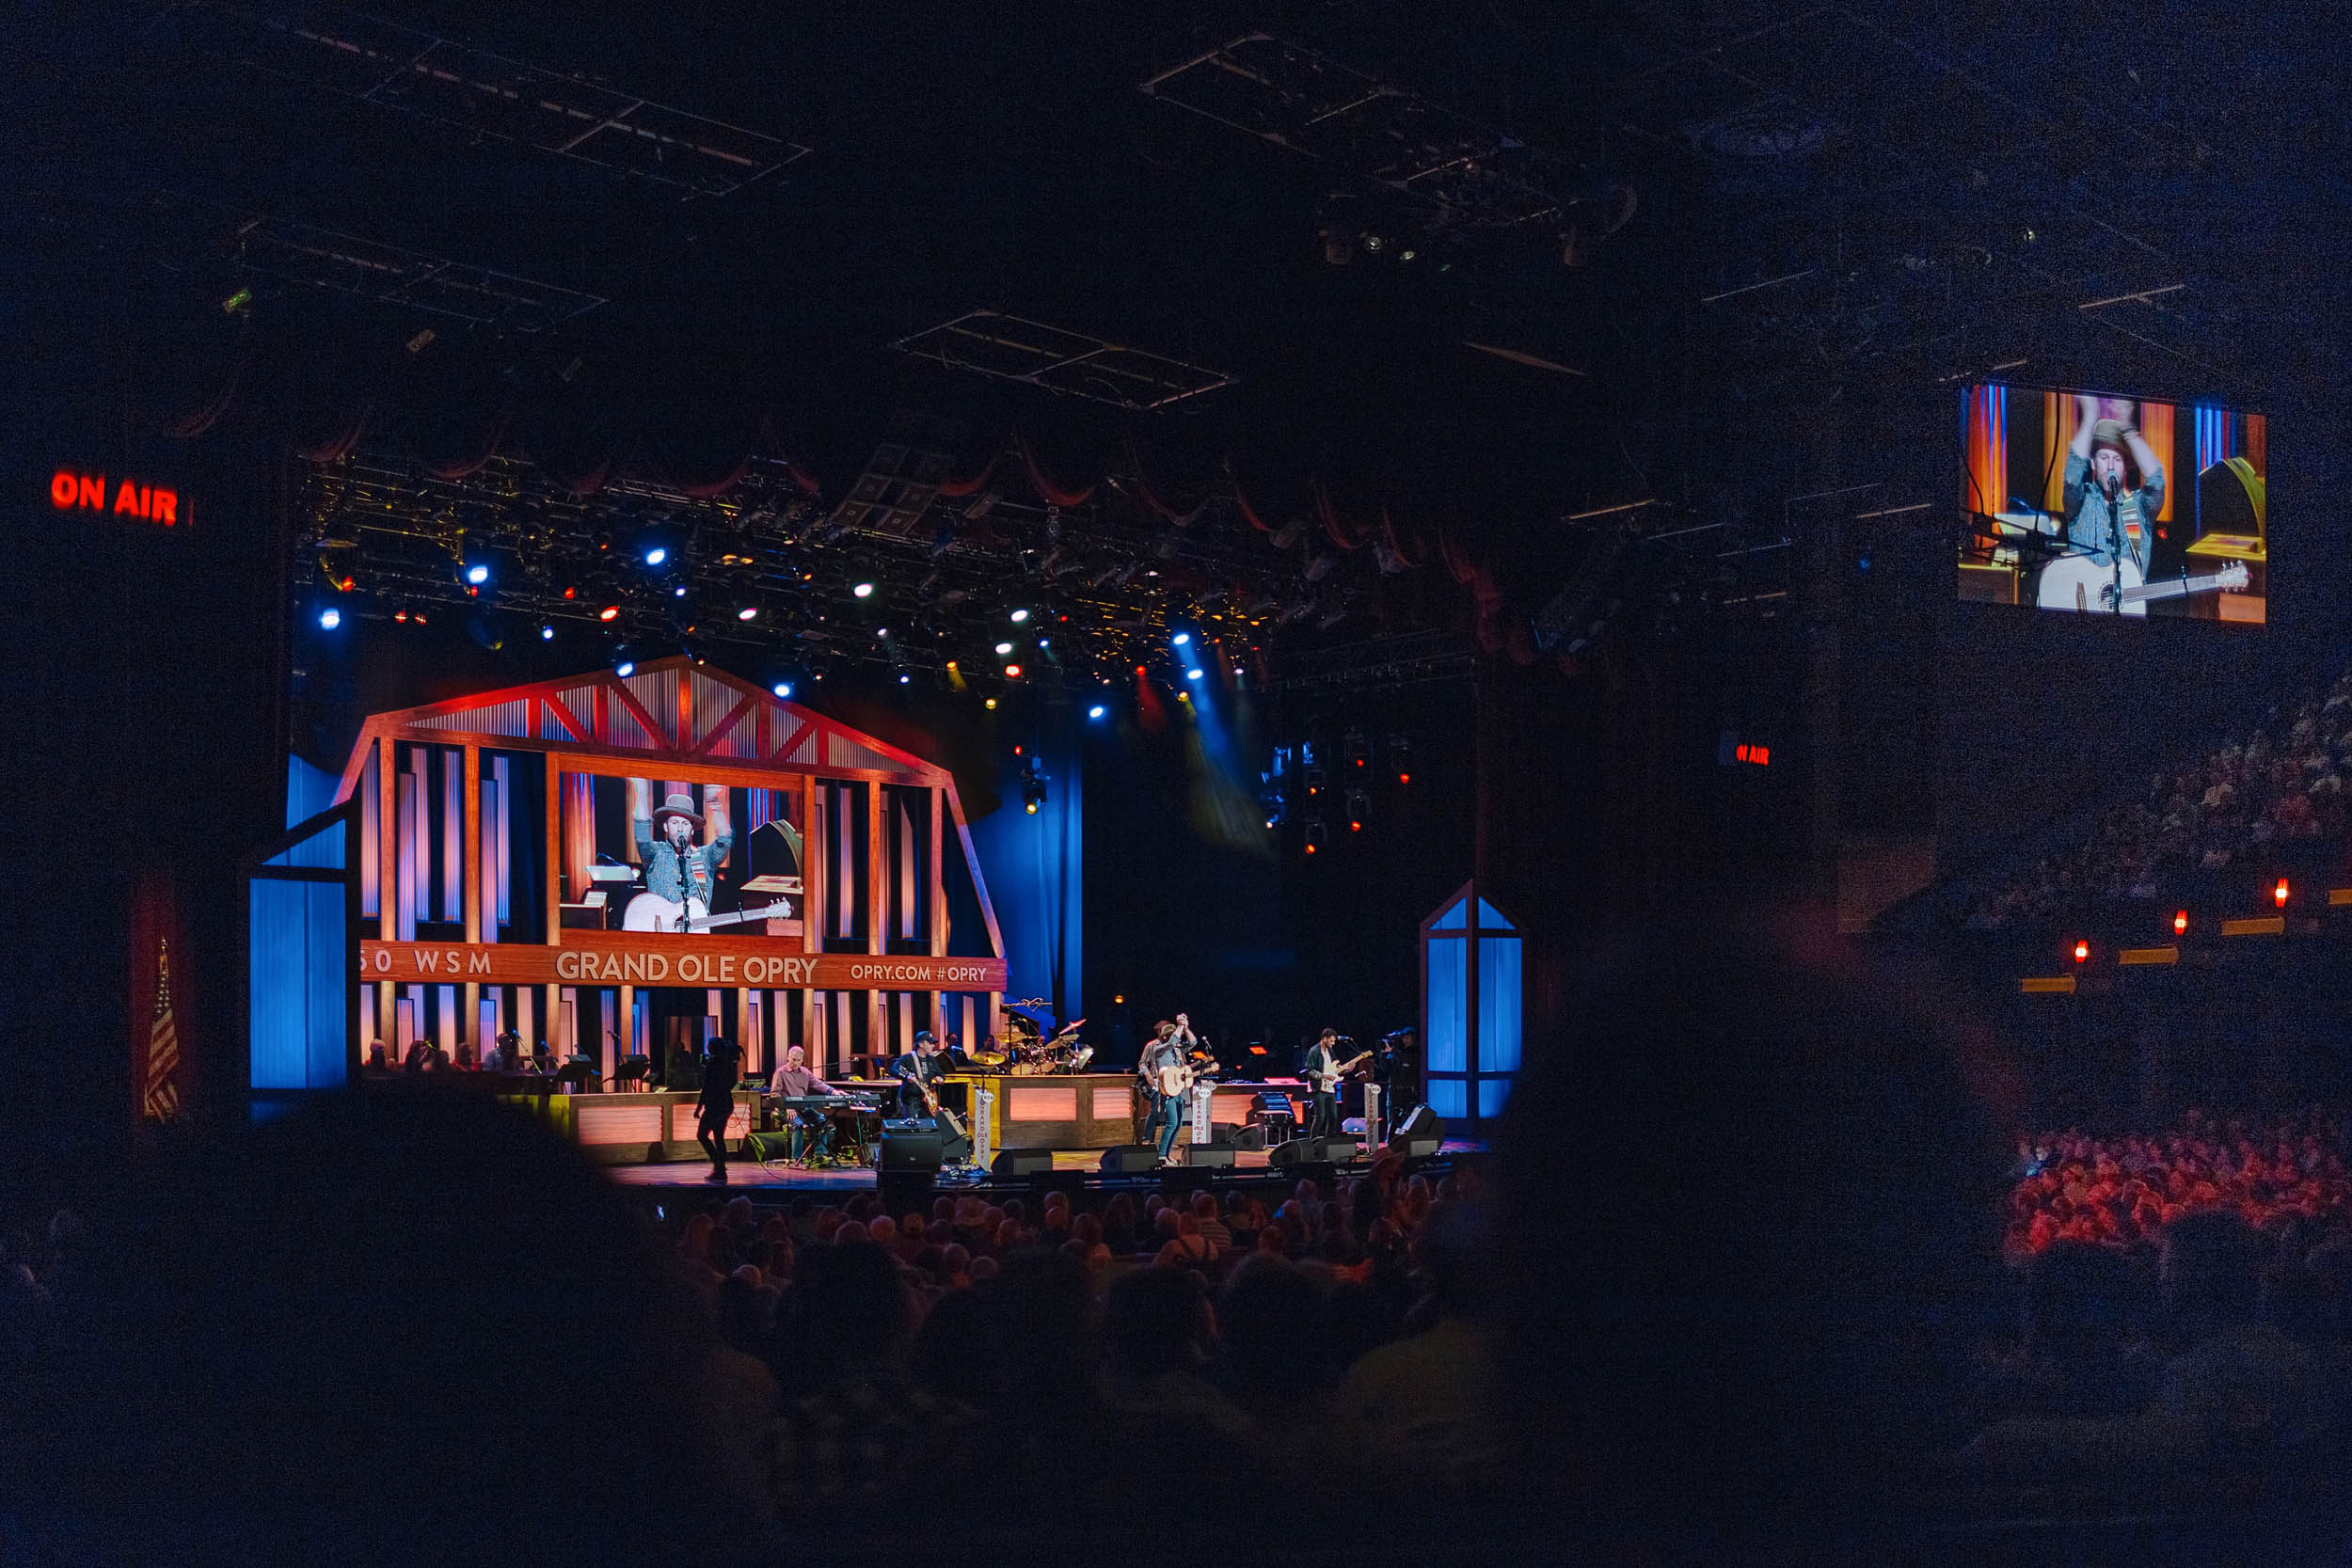 Drake White performing live at Nashville's Grand Ole Opry